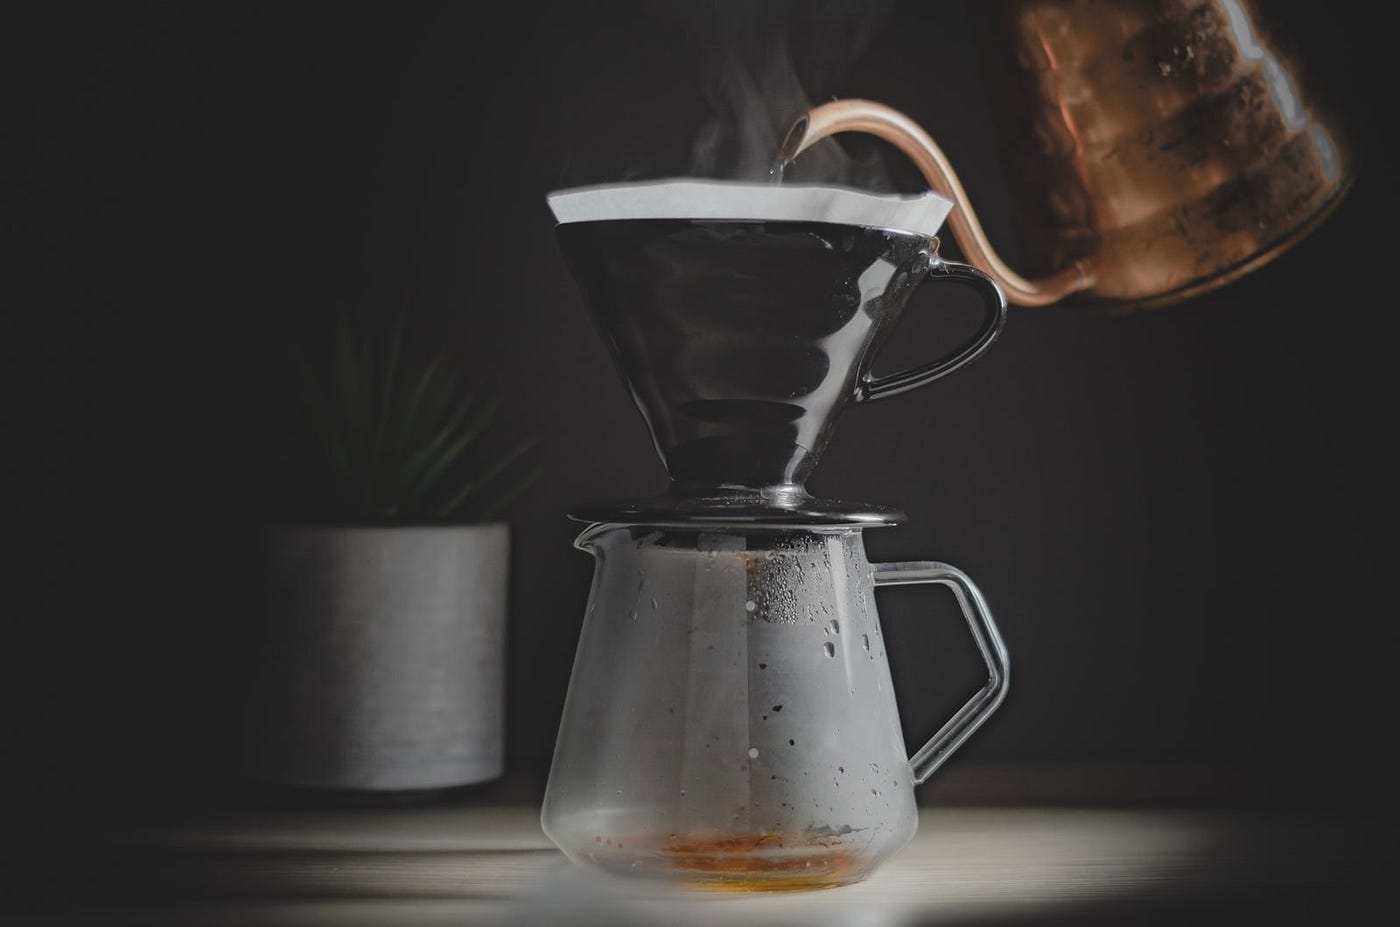 V60 Coffee Recipe for Two (Inspired by Scott Rao), by Olly J